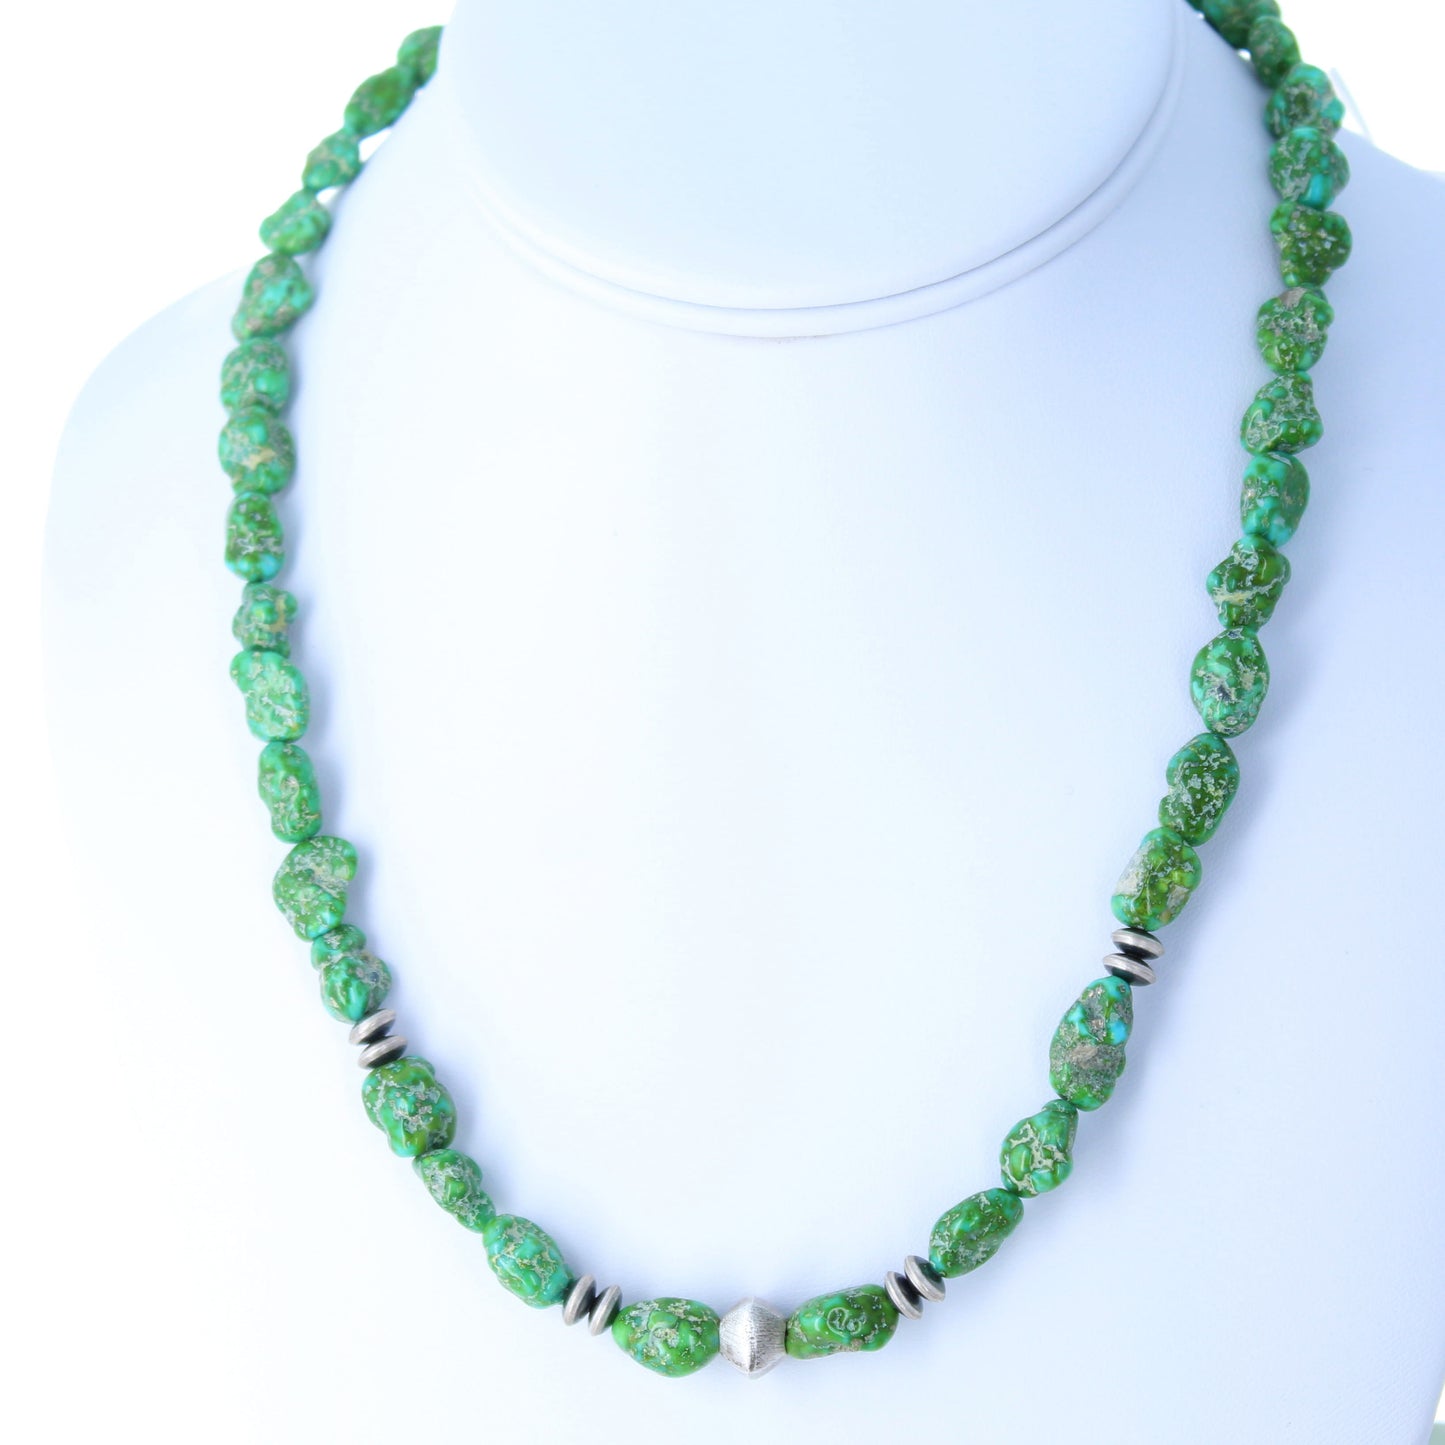 VIVID Sonoran Gold Turquoise Beads Necklace LIME GREEN 18"